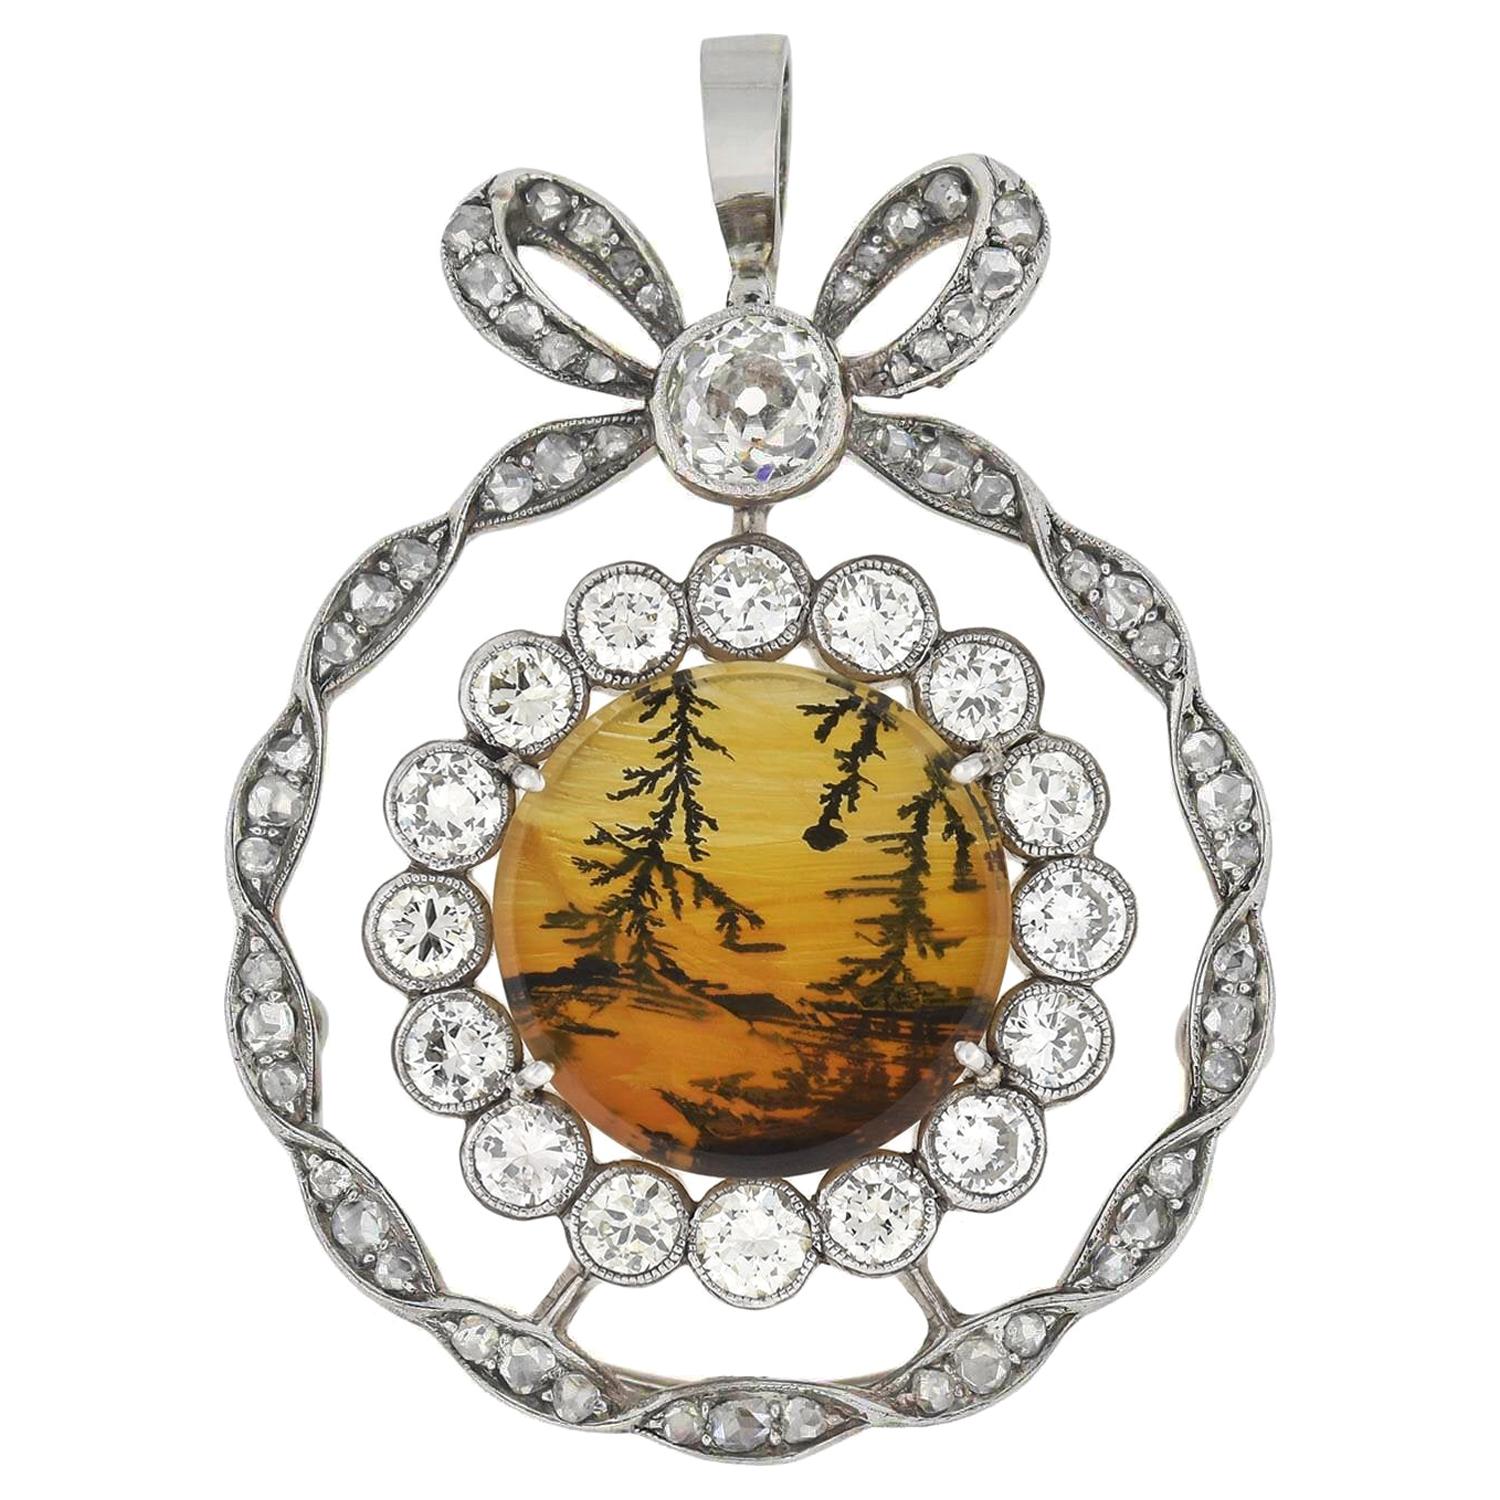 An absolutely fabulous and unique diamond and agate pendant from the Edwardian (ca1910s) period! This very unusual piece portrays 2 sparkling diamond rings and a lovely bow resting on top. The pendant, which is fairly large in size, is crafted in